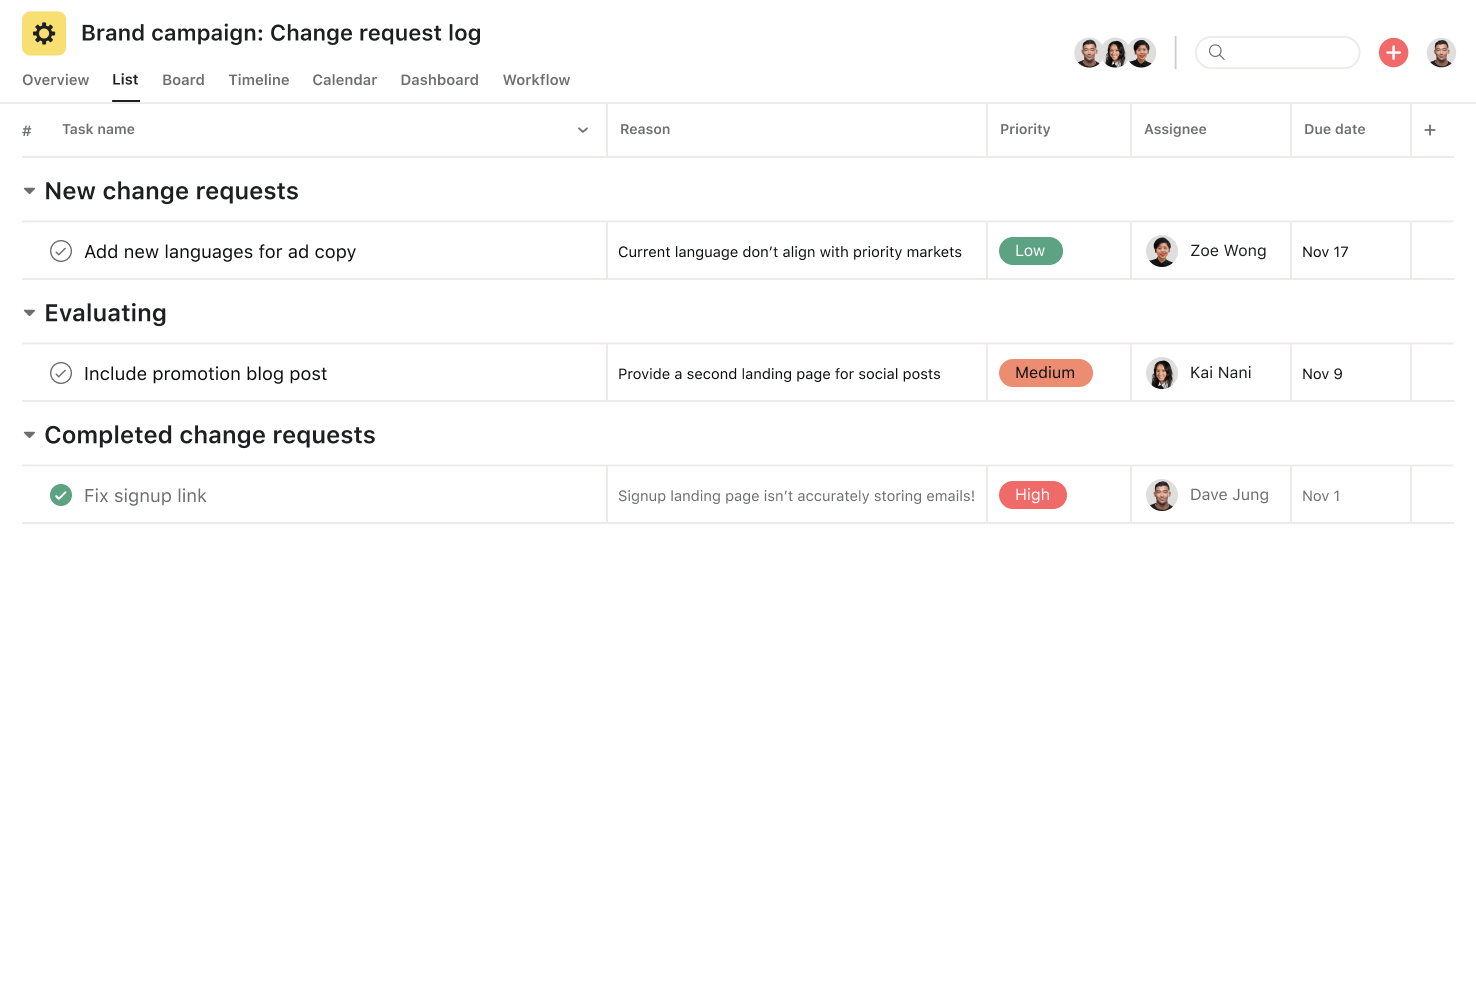 [product ui] Empty change request log template in Asana, spreadsheet-style project view (List)